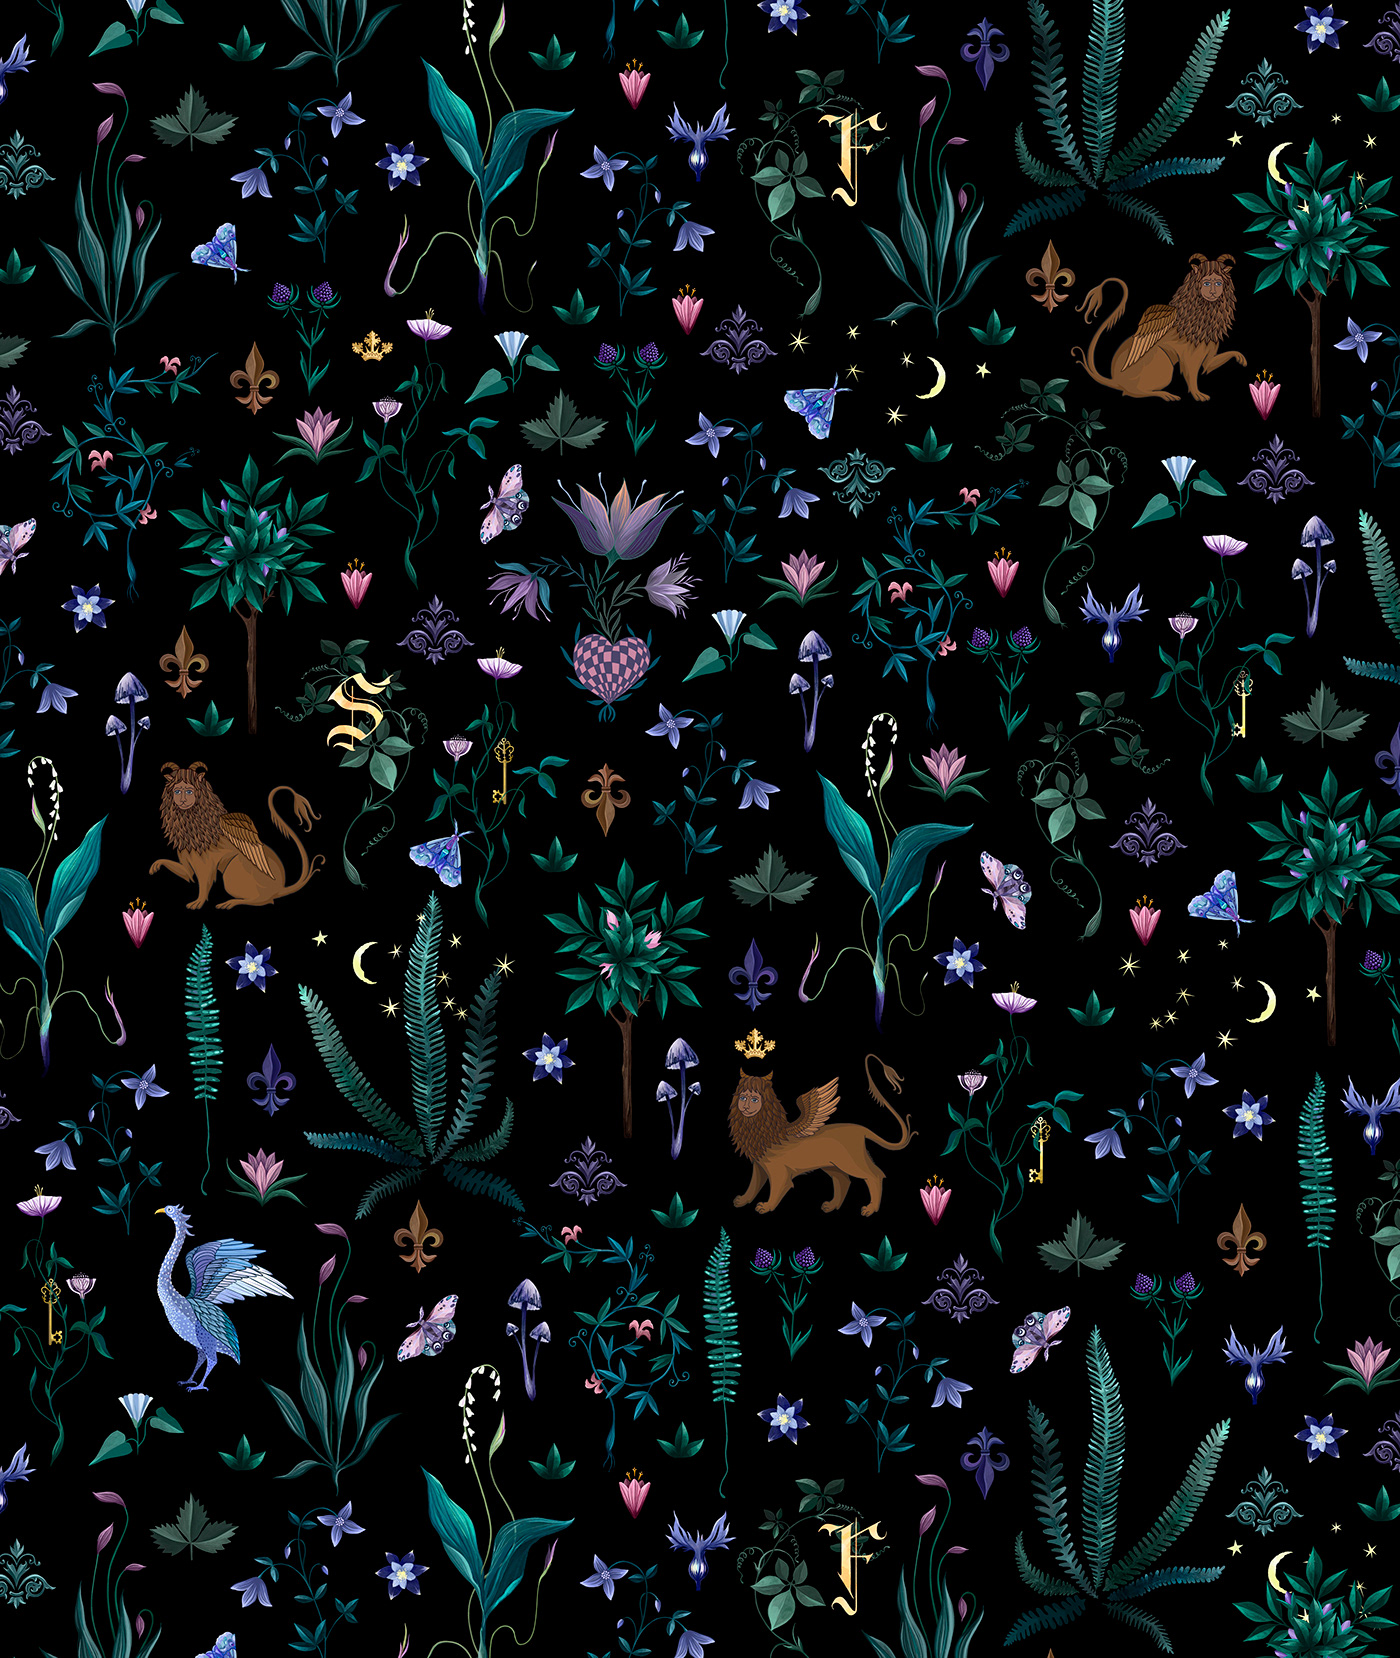 Textile design was inspired by the story of the fairy magical forest.